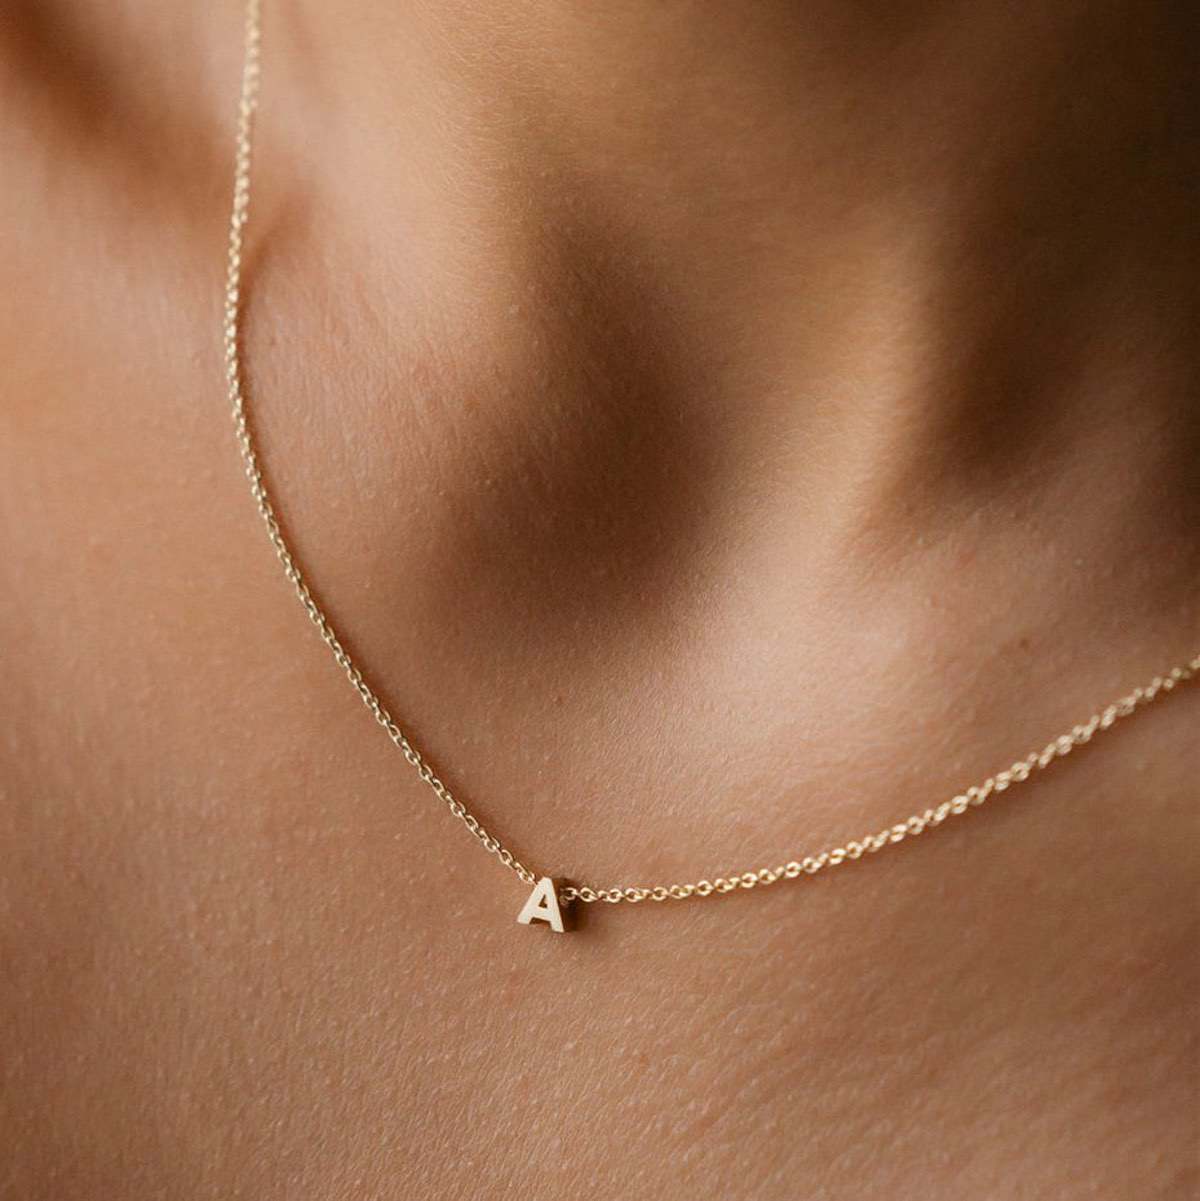 Hand finished solid gold letter necklace: Close up of a model wearing our beautiful 9ct yellow gold Tiny Letter A Charm Necklace with a 40cm cable chain